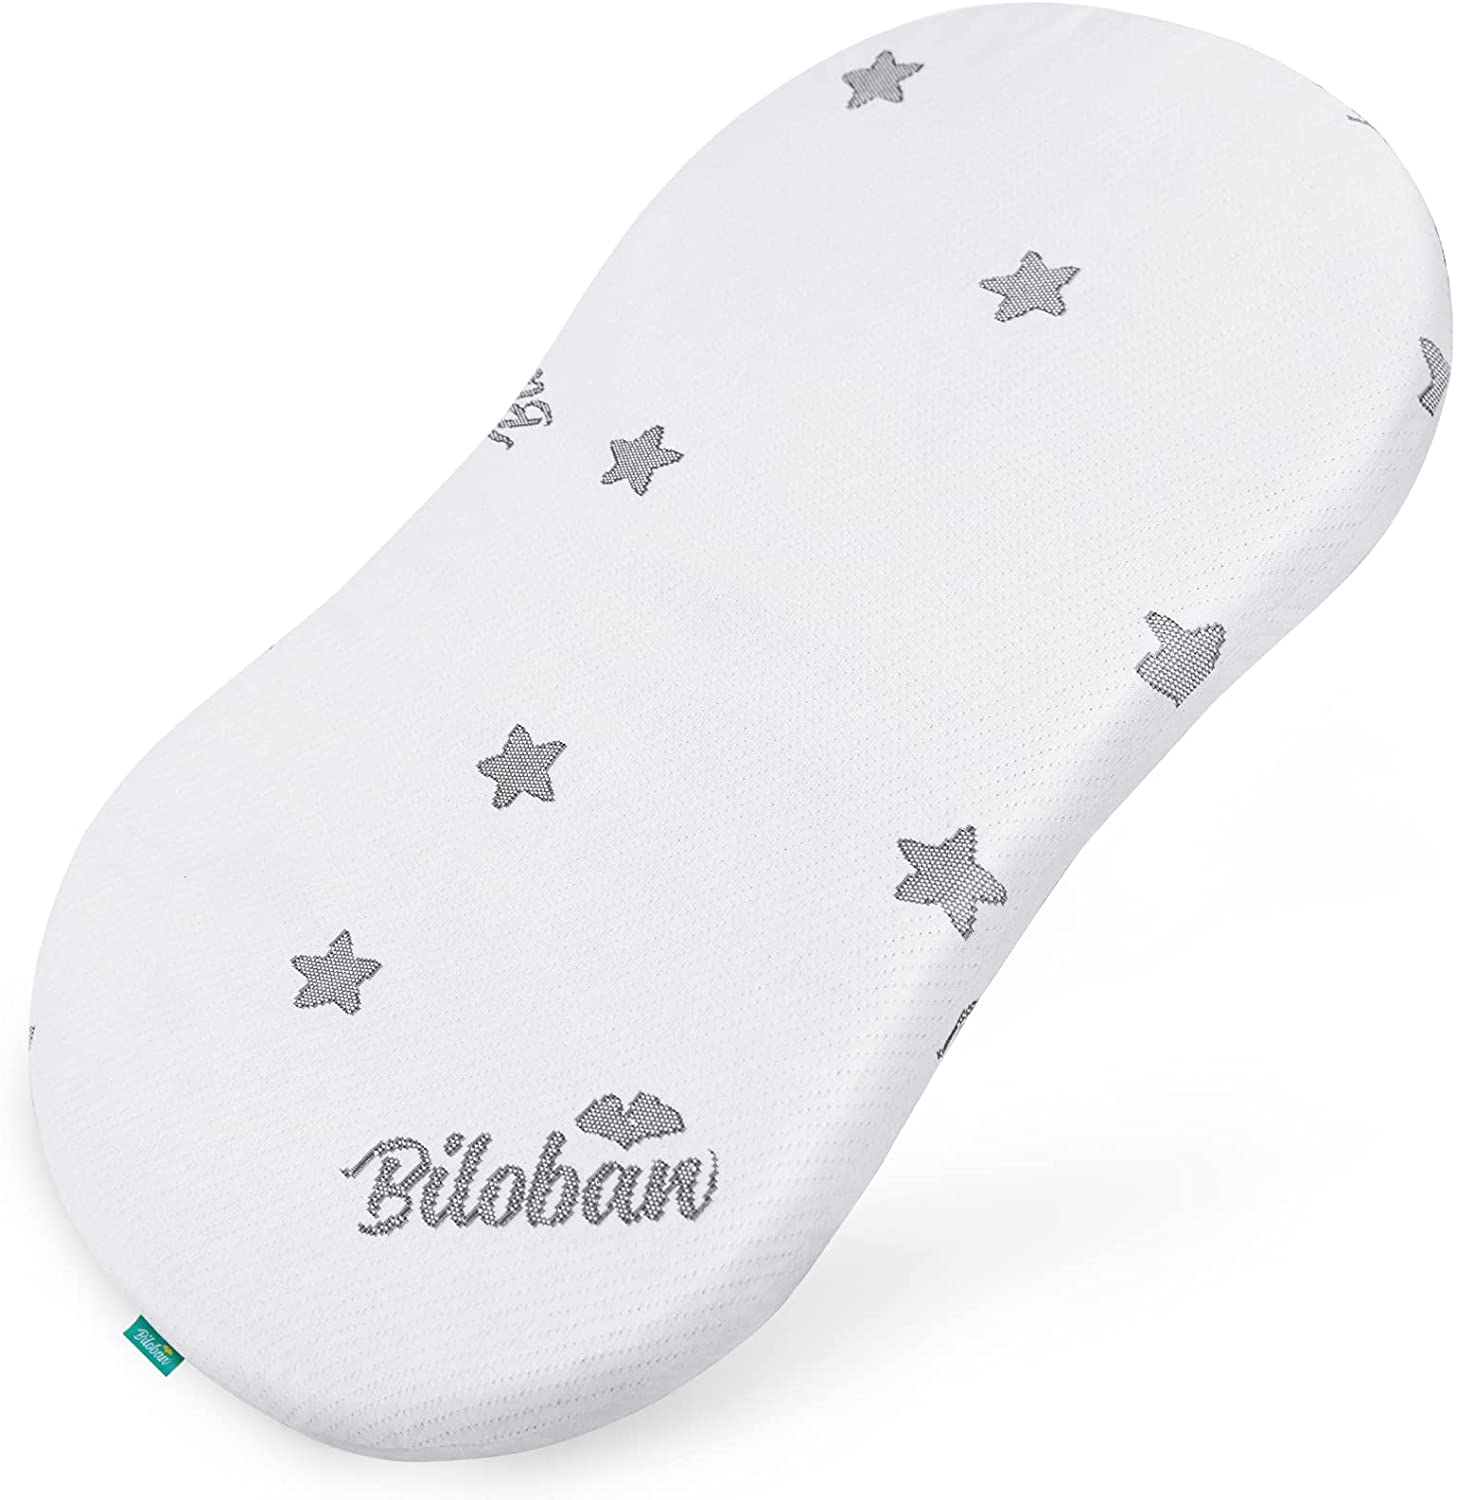 Shop by Size - Bassinet Mattress with Bamboo Cover, Waterproof & Breathable, Hourglass - Biloban Online Store